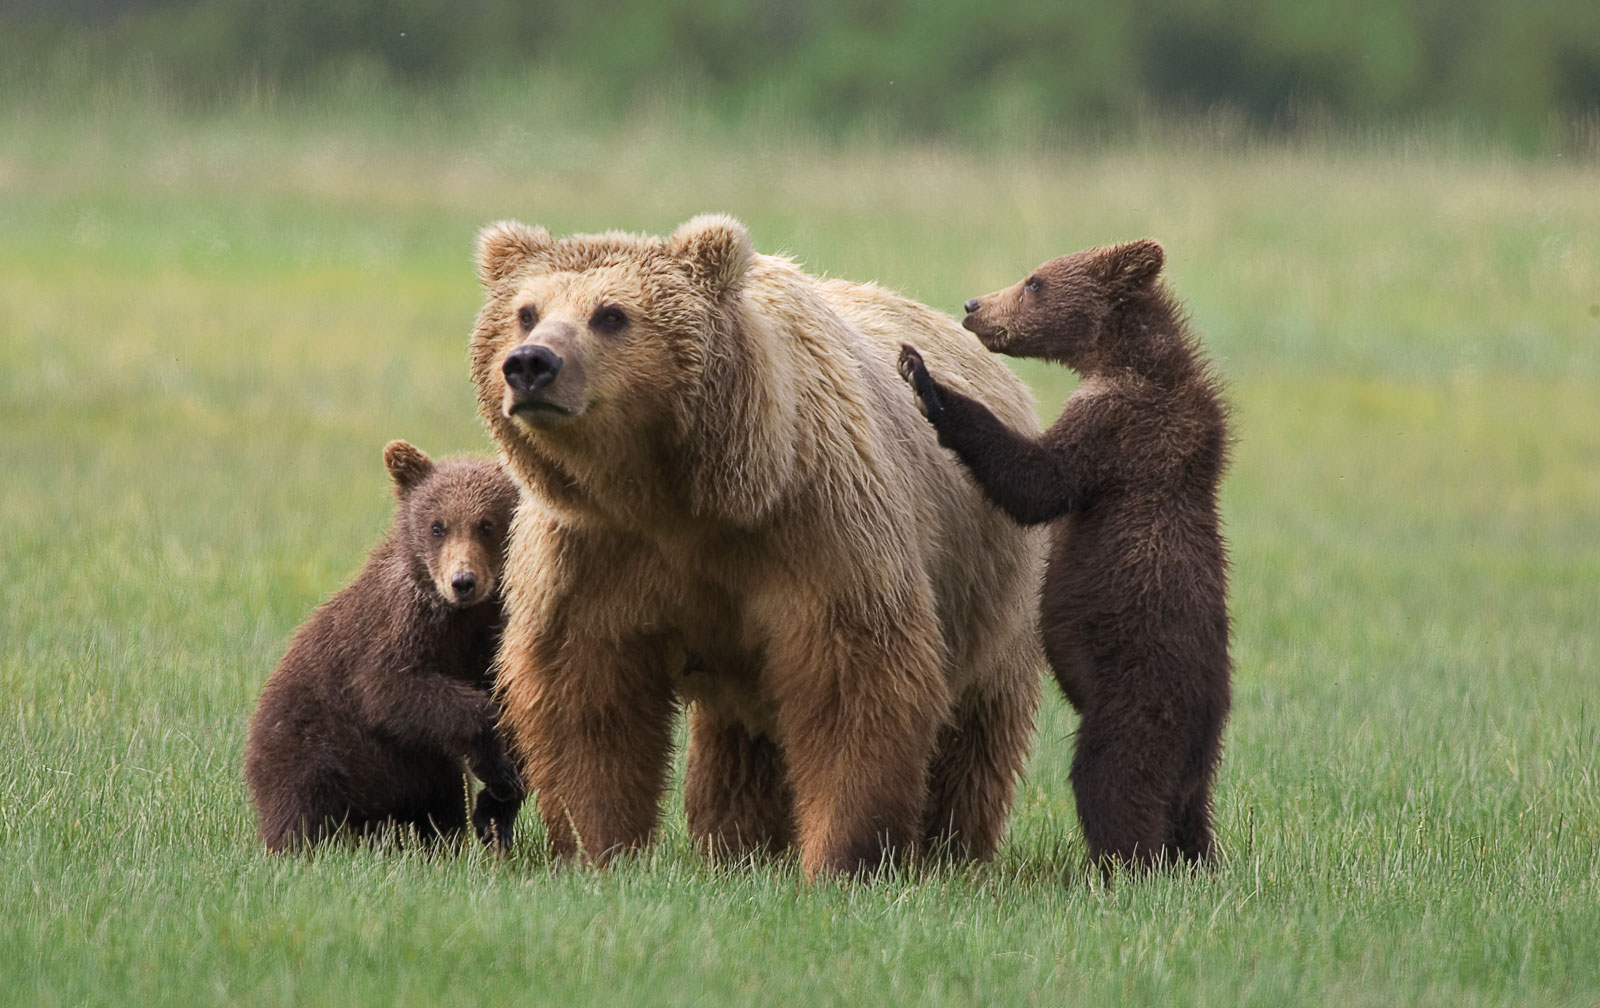 Grizzly dais nrog cubs